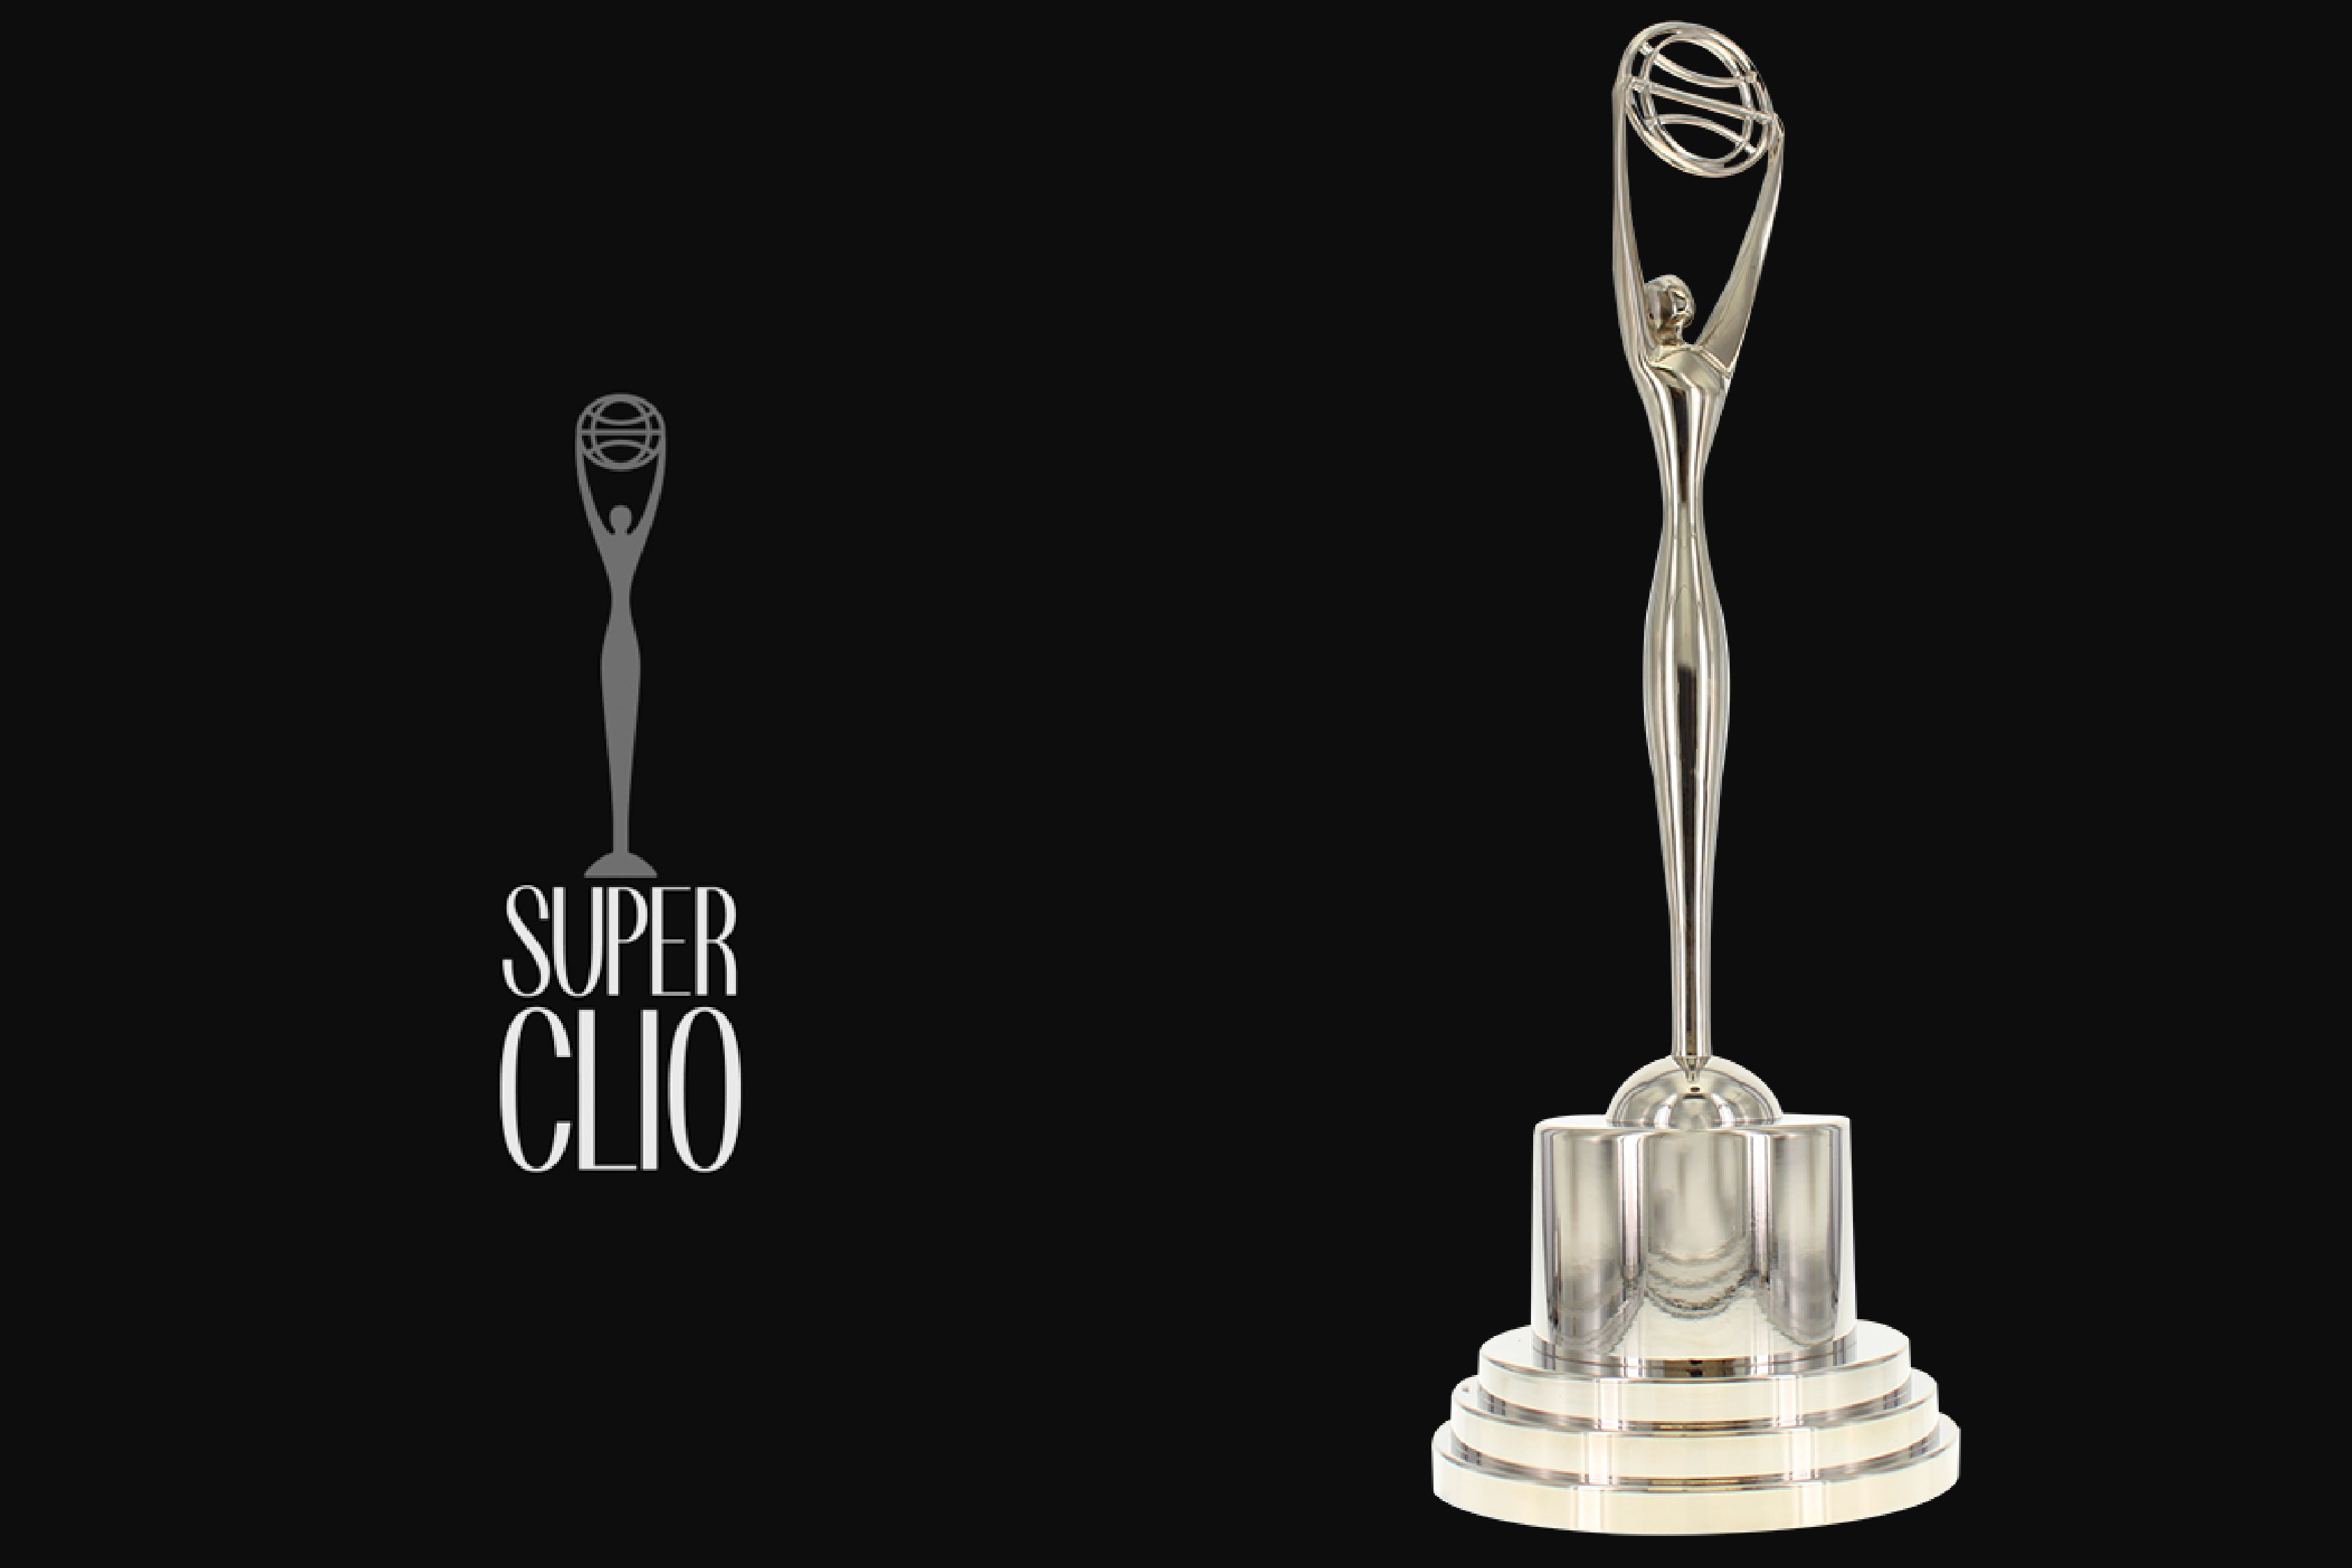 Super Clio award, an expertly crafted, two foot tall version of the iconic Clio trophy